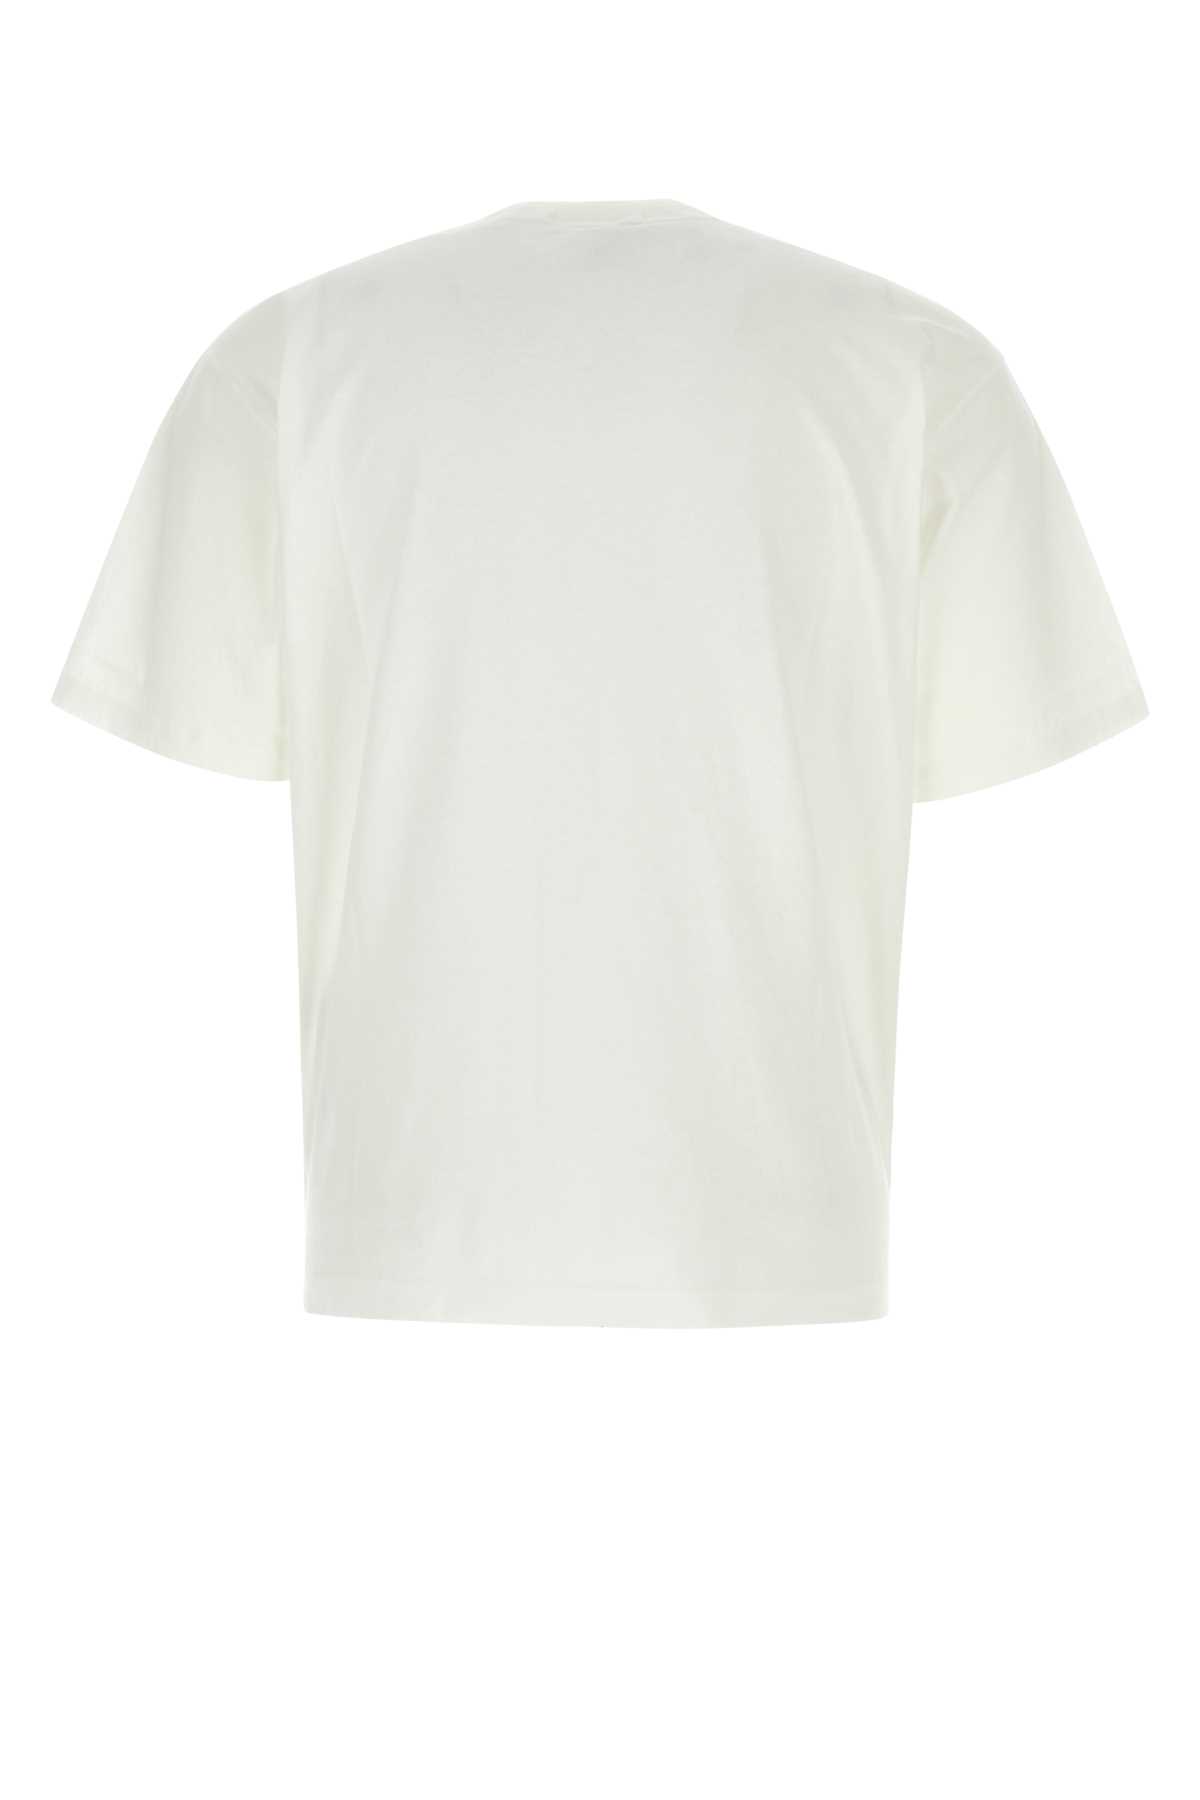 Stone Island White Cotton T-shirt In A0001